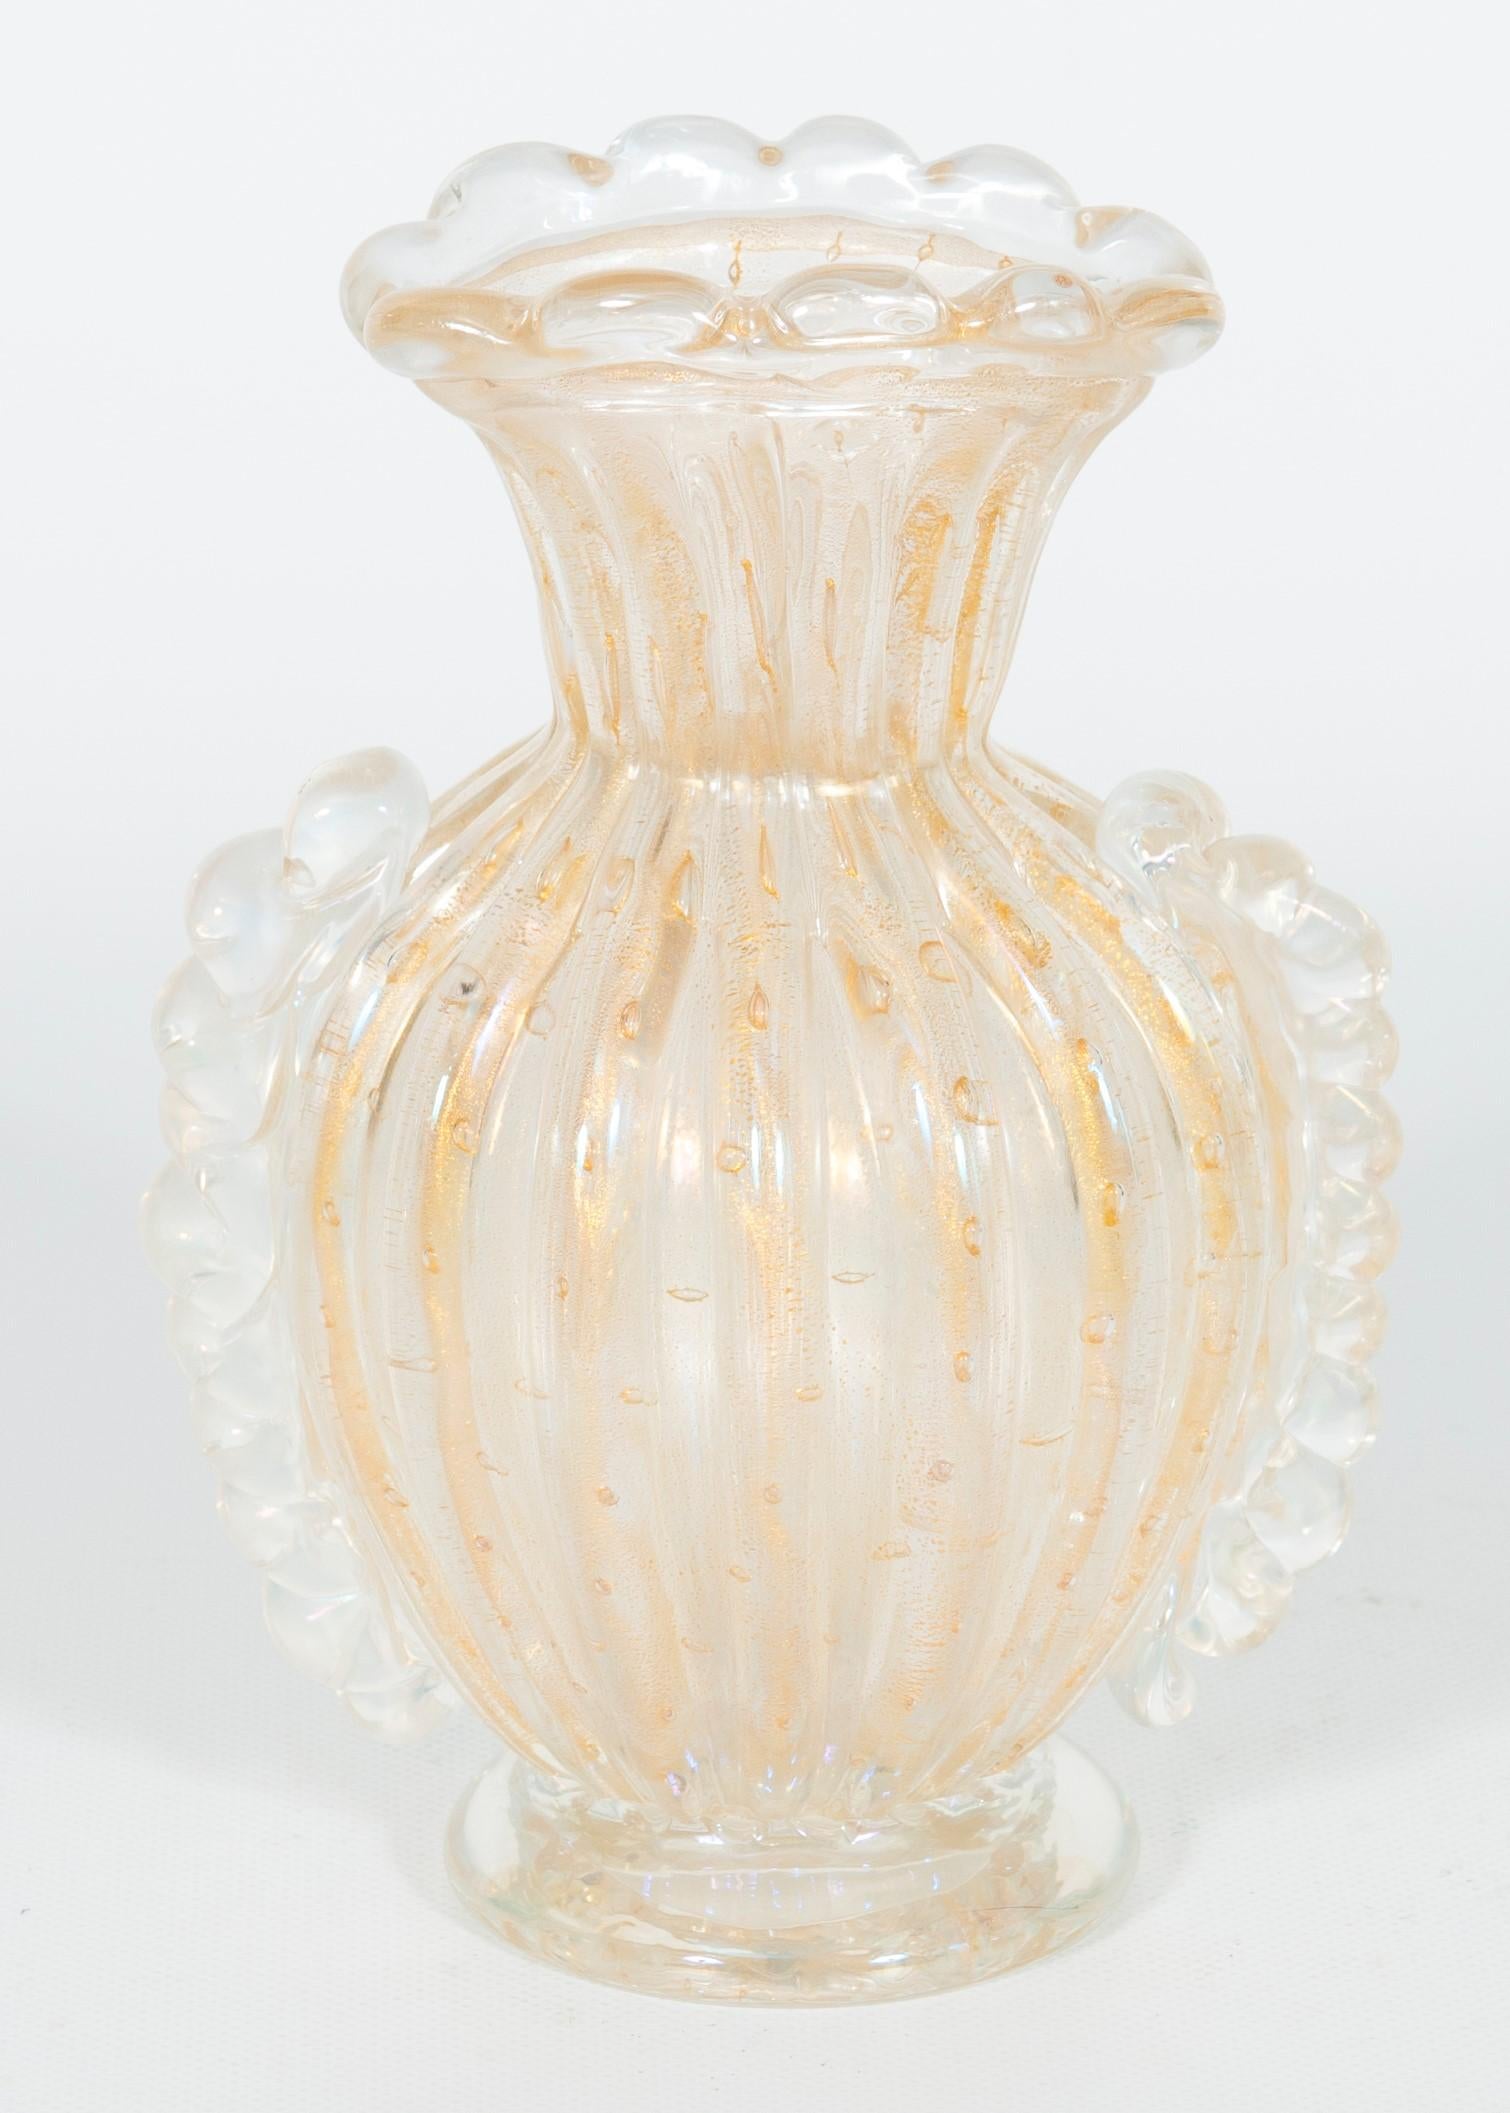 Murano Glass Barovier Vase with Submerged 24-carat Gold, 20th Century Italy.
This is a timeless outstanding Venetian blown glass vase, handmade by the renowned glassmaker Barovier in the island of Murano following the ancient glassmaking